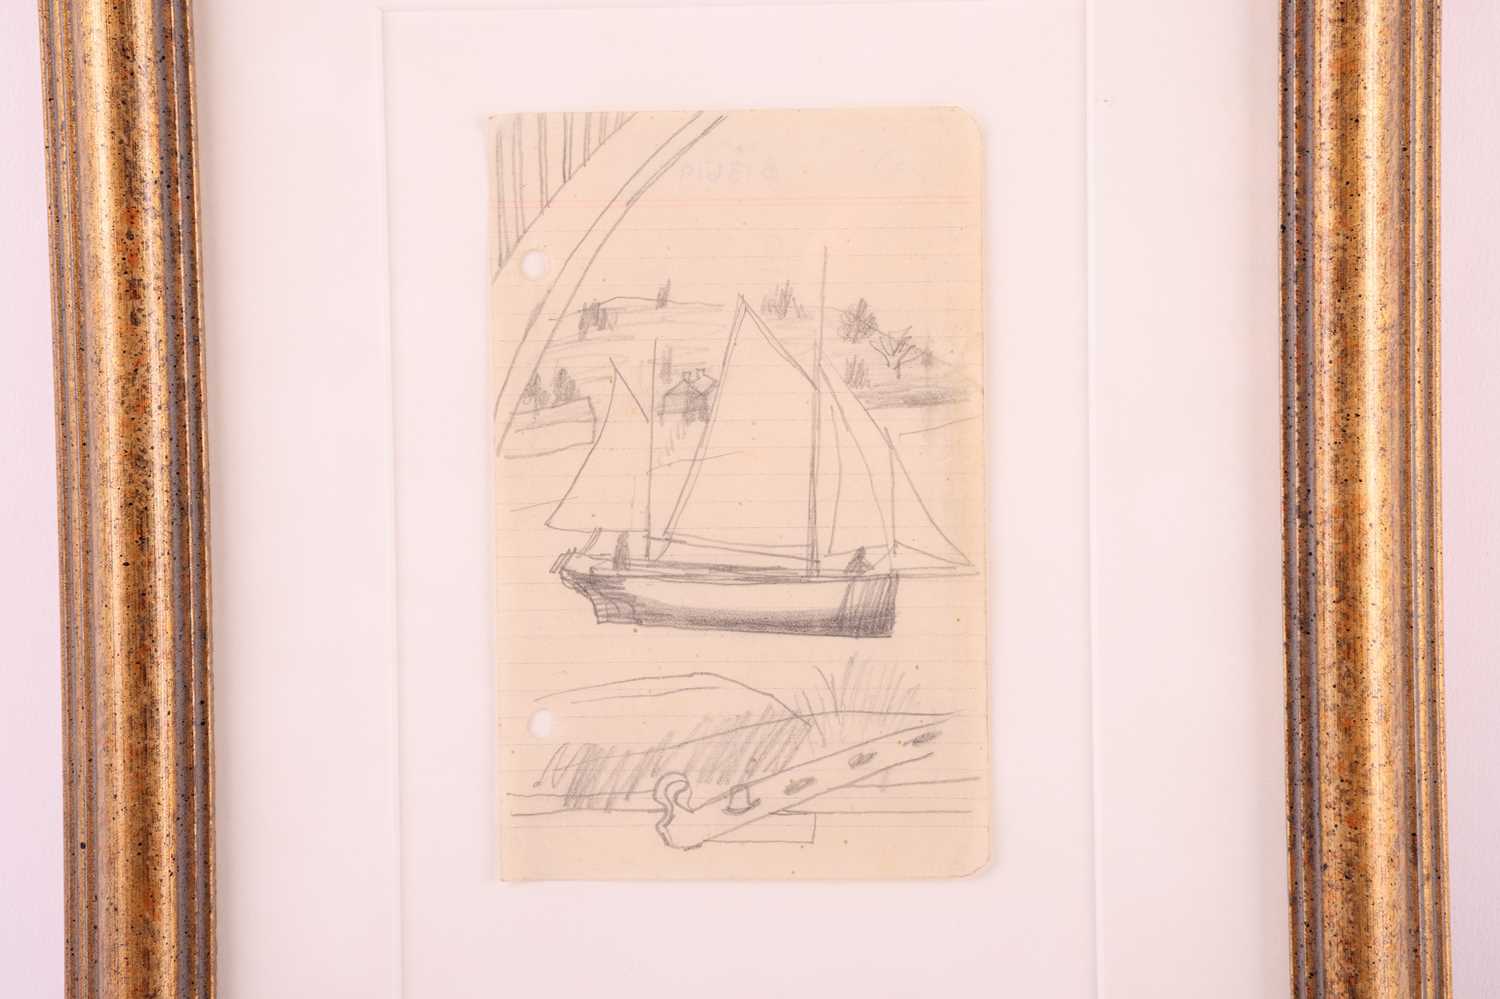 Ben Nicholson (1894-1982), Sailing boat through a window, Isle of Wight, unsigned, pencil on notepap - Image 3 of 7